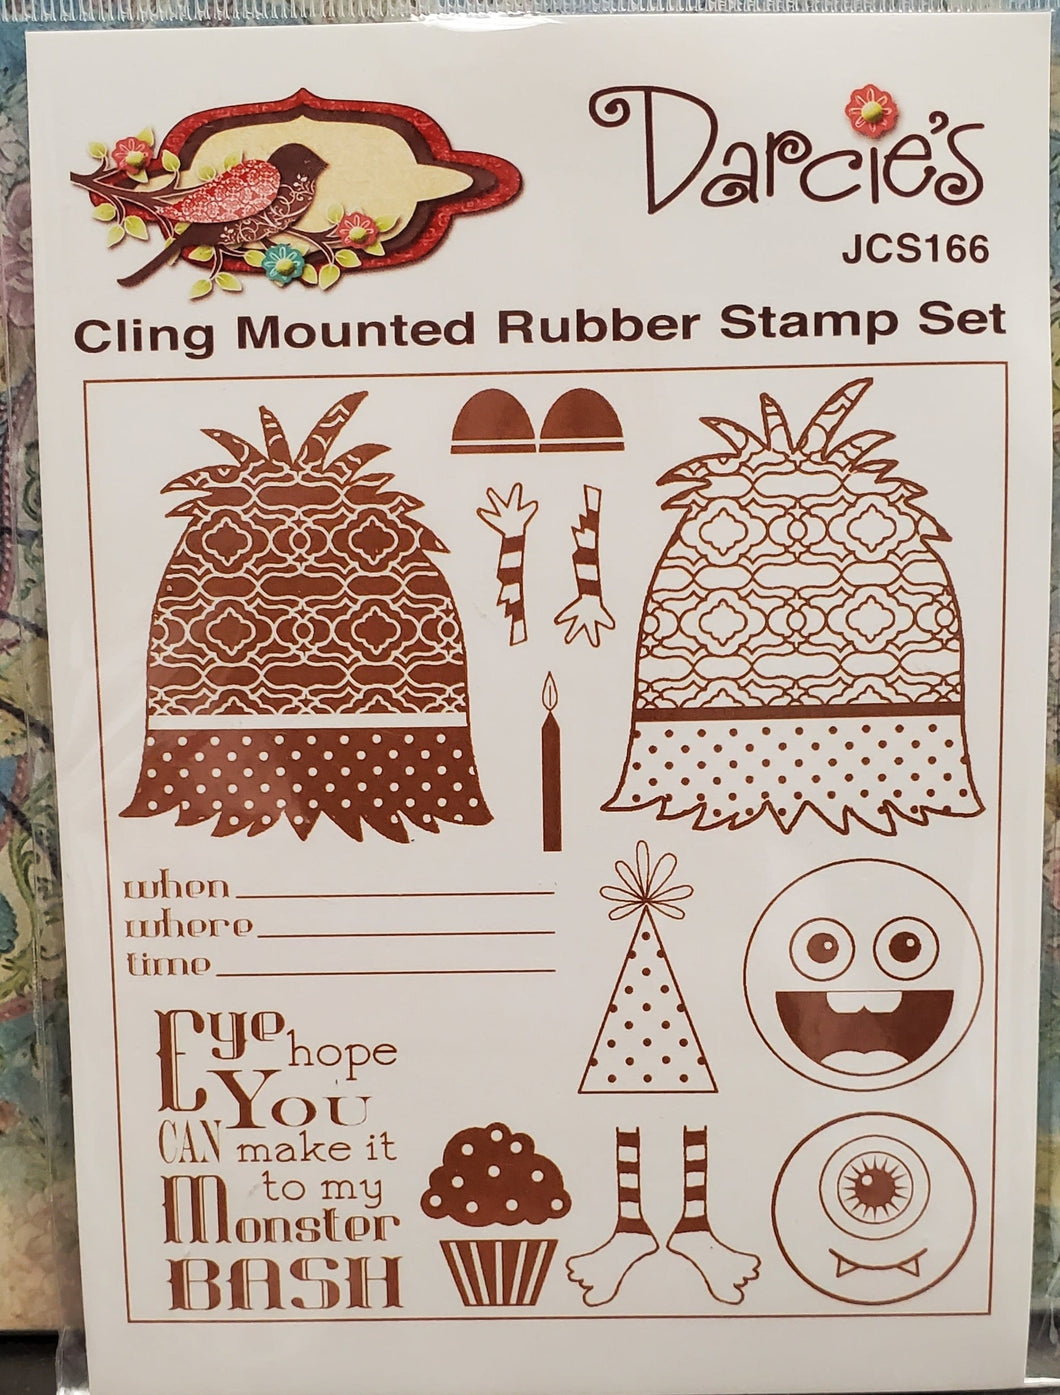 Darcie's Heart & Home: Cling Mounted Rubber Stamp Set - Monster Bash (JCS166)